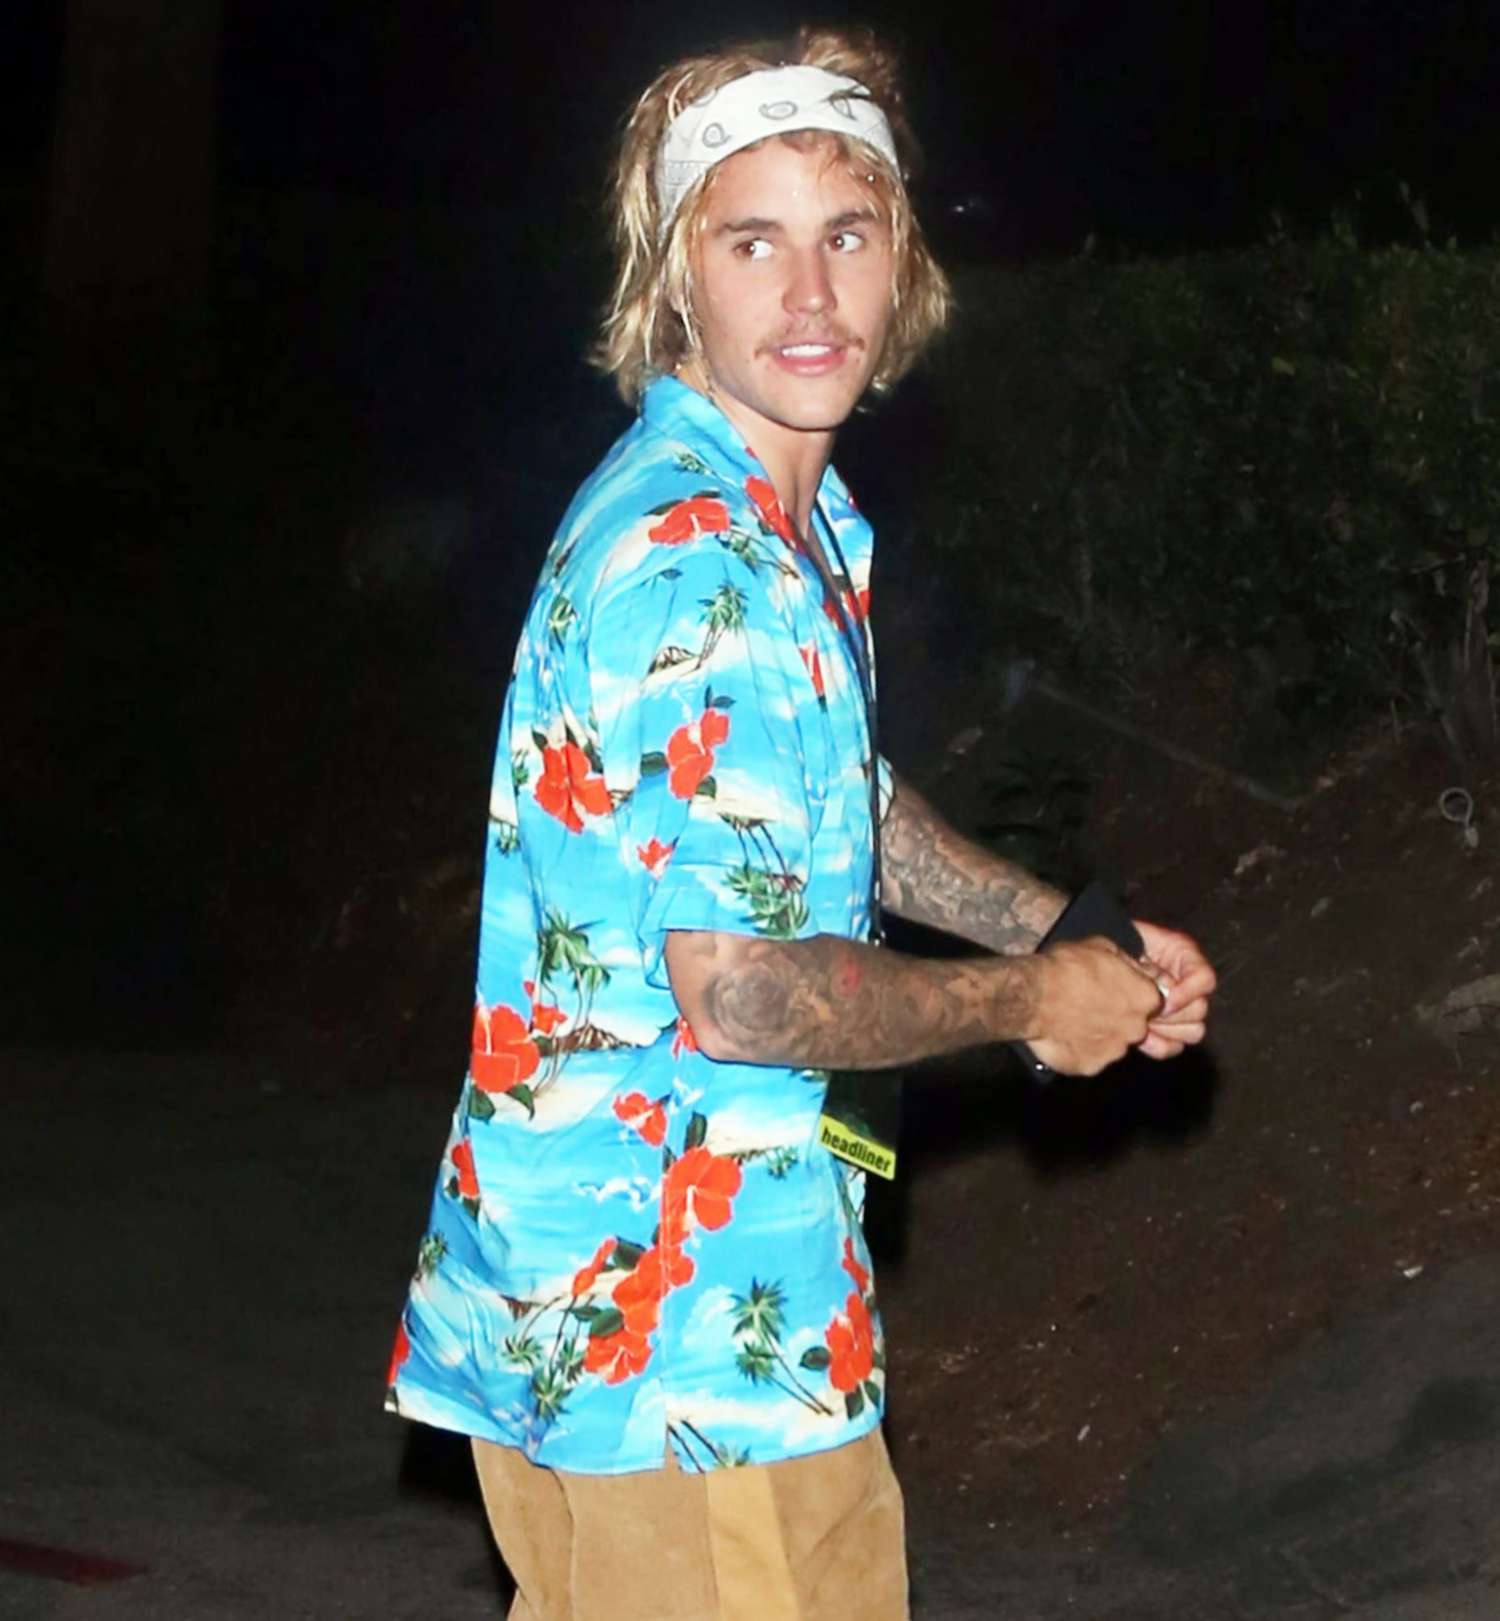 Justin Bieber Leaves Hollywood Bowl After Chilling With Rapper Post Malone